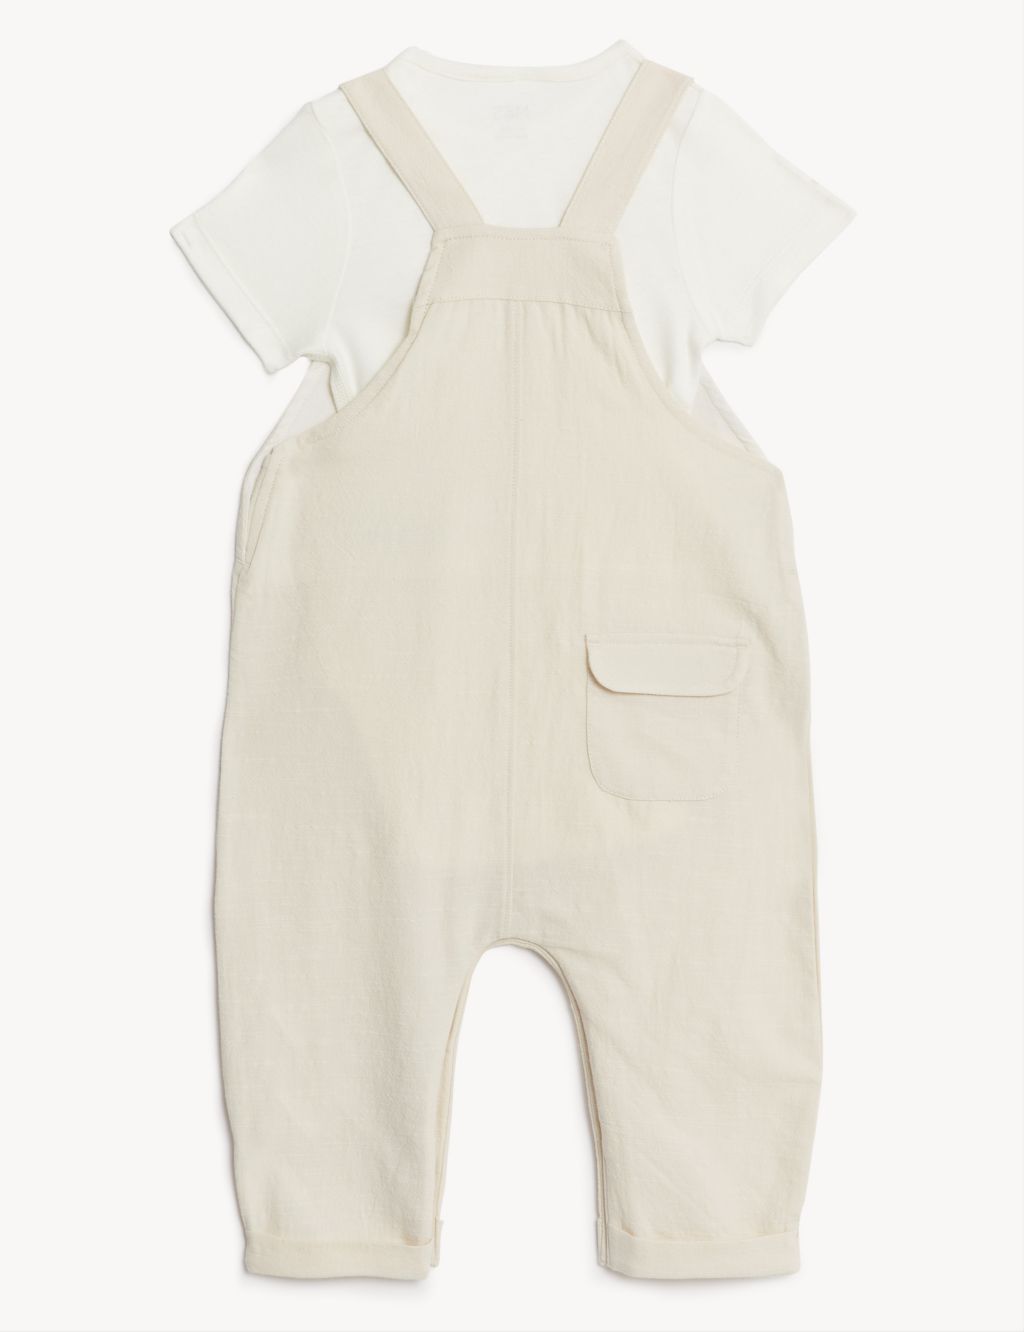 2pc Cotton Blend Dungarees Outfit (0-3 Yrs) image 2